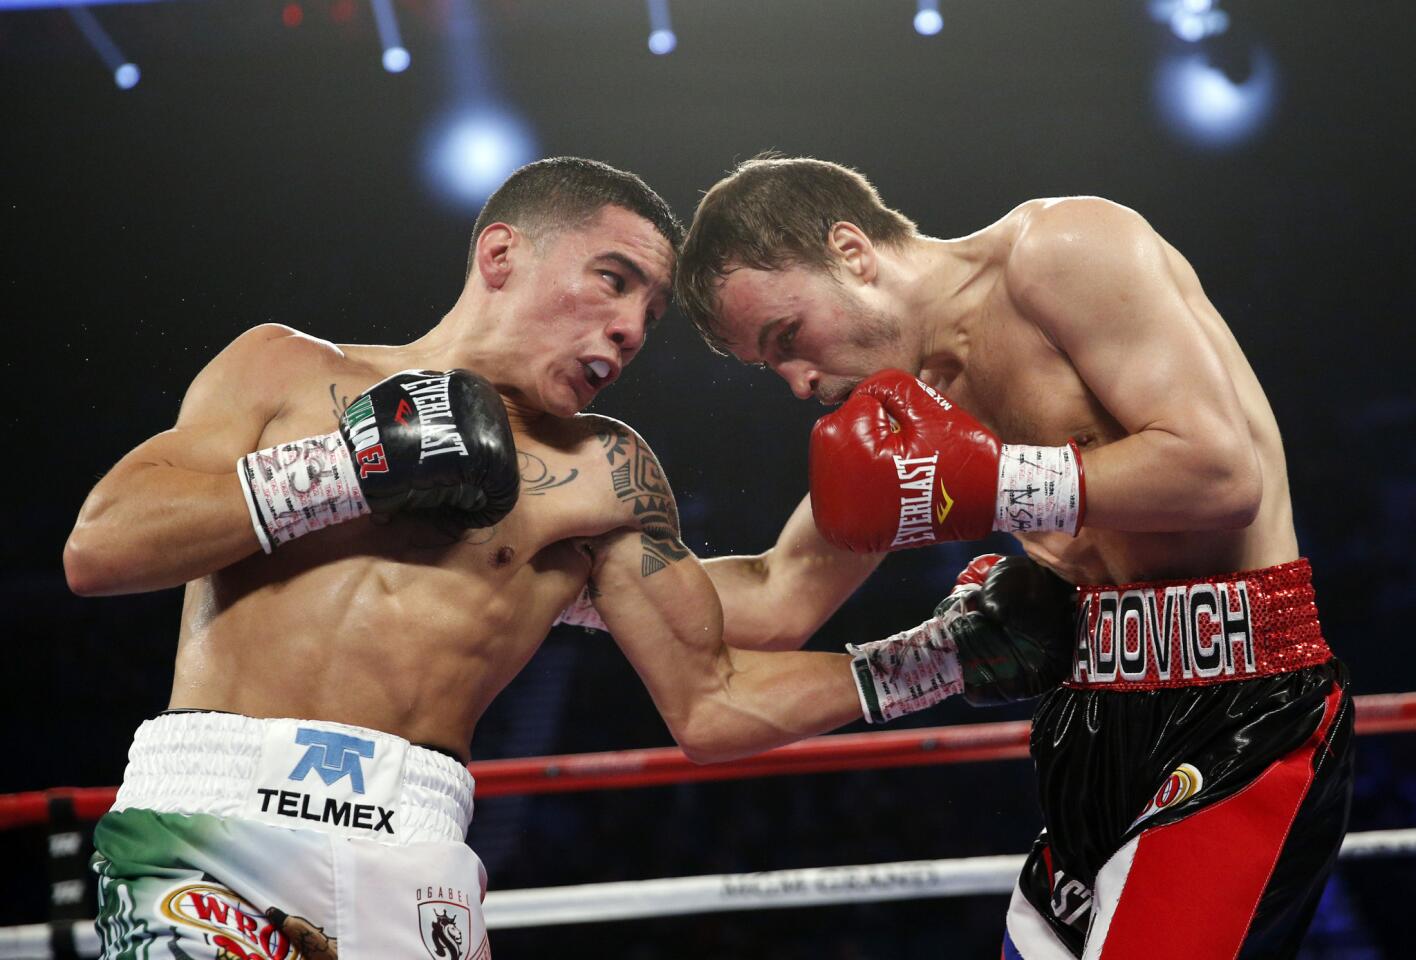 Oscar Valdez, left, of Mexico, punches Evgeny Gradovich, of Russia, during their featherweight title boxing bout Saturday, April 9, 2016, in Las Vegas. (AP Photo/John Locher)